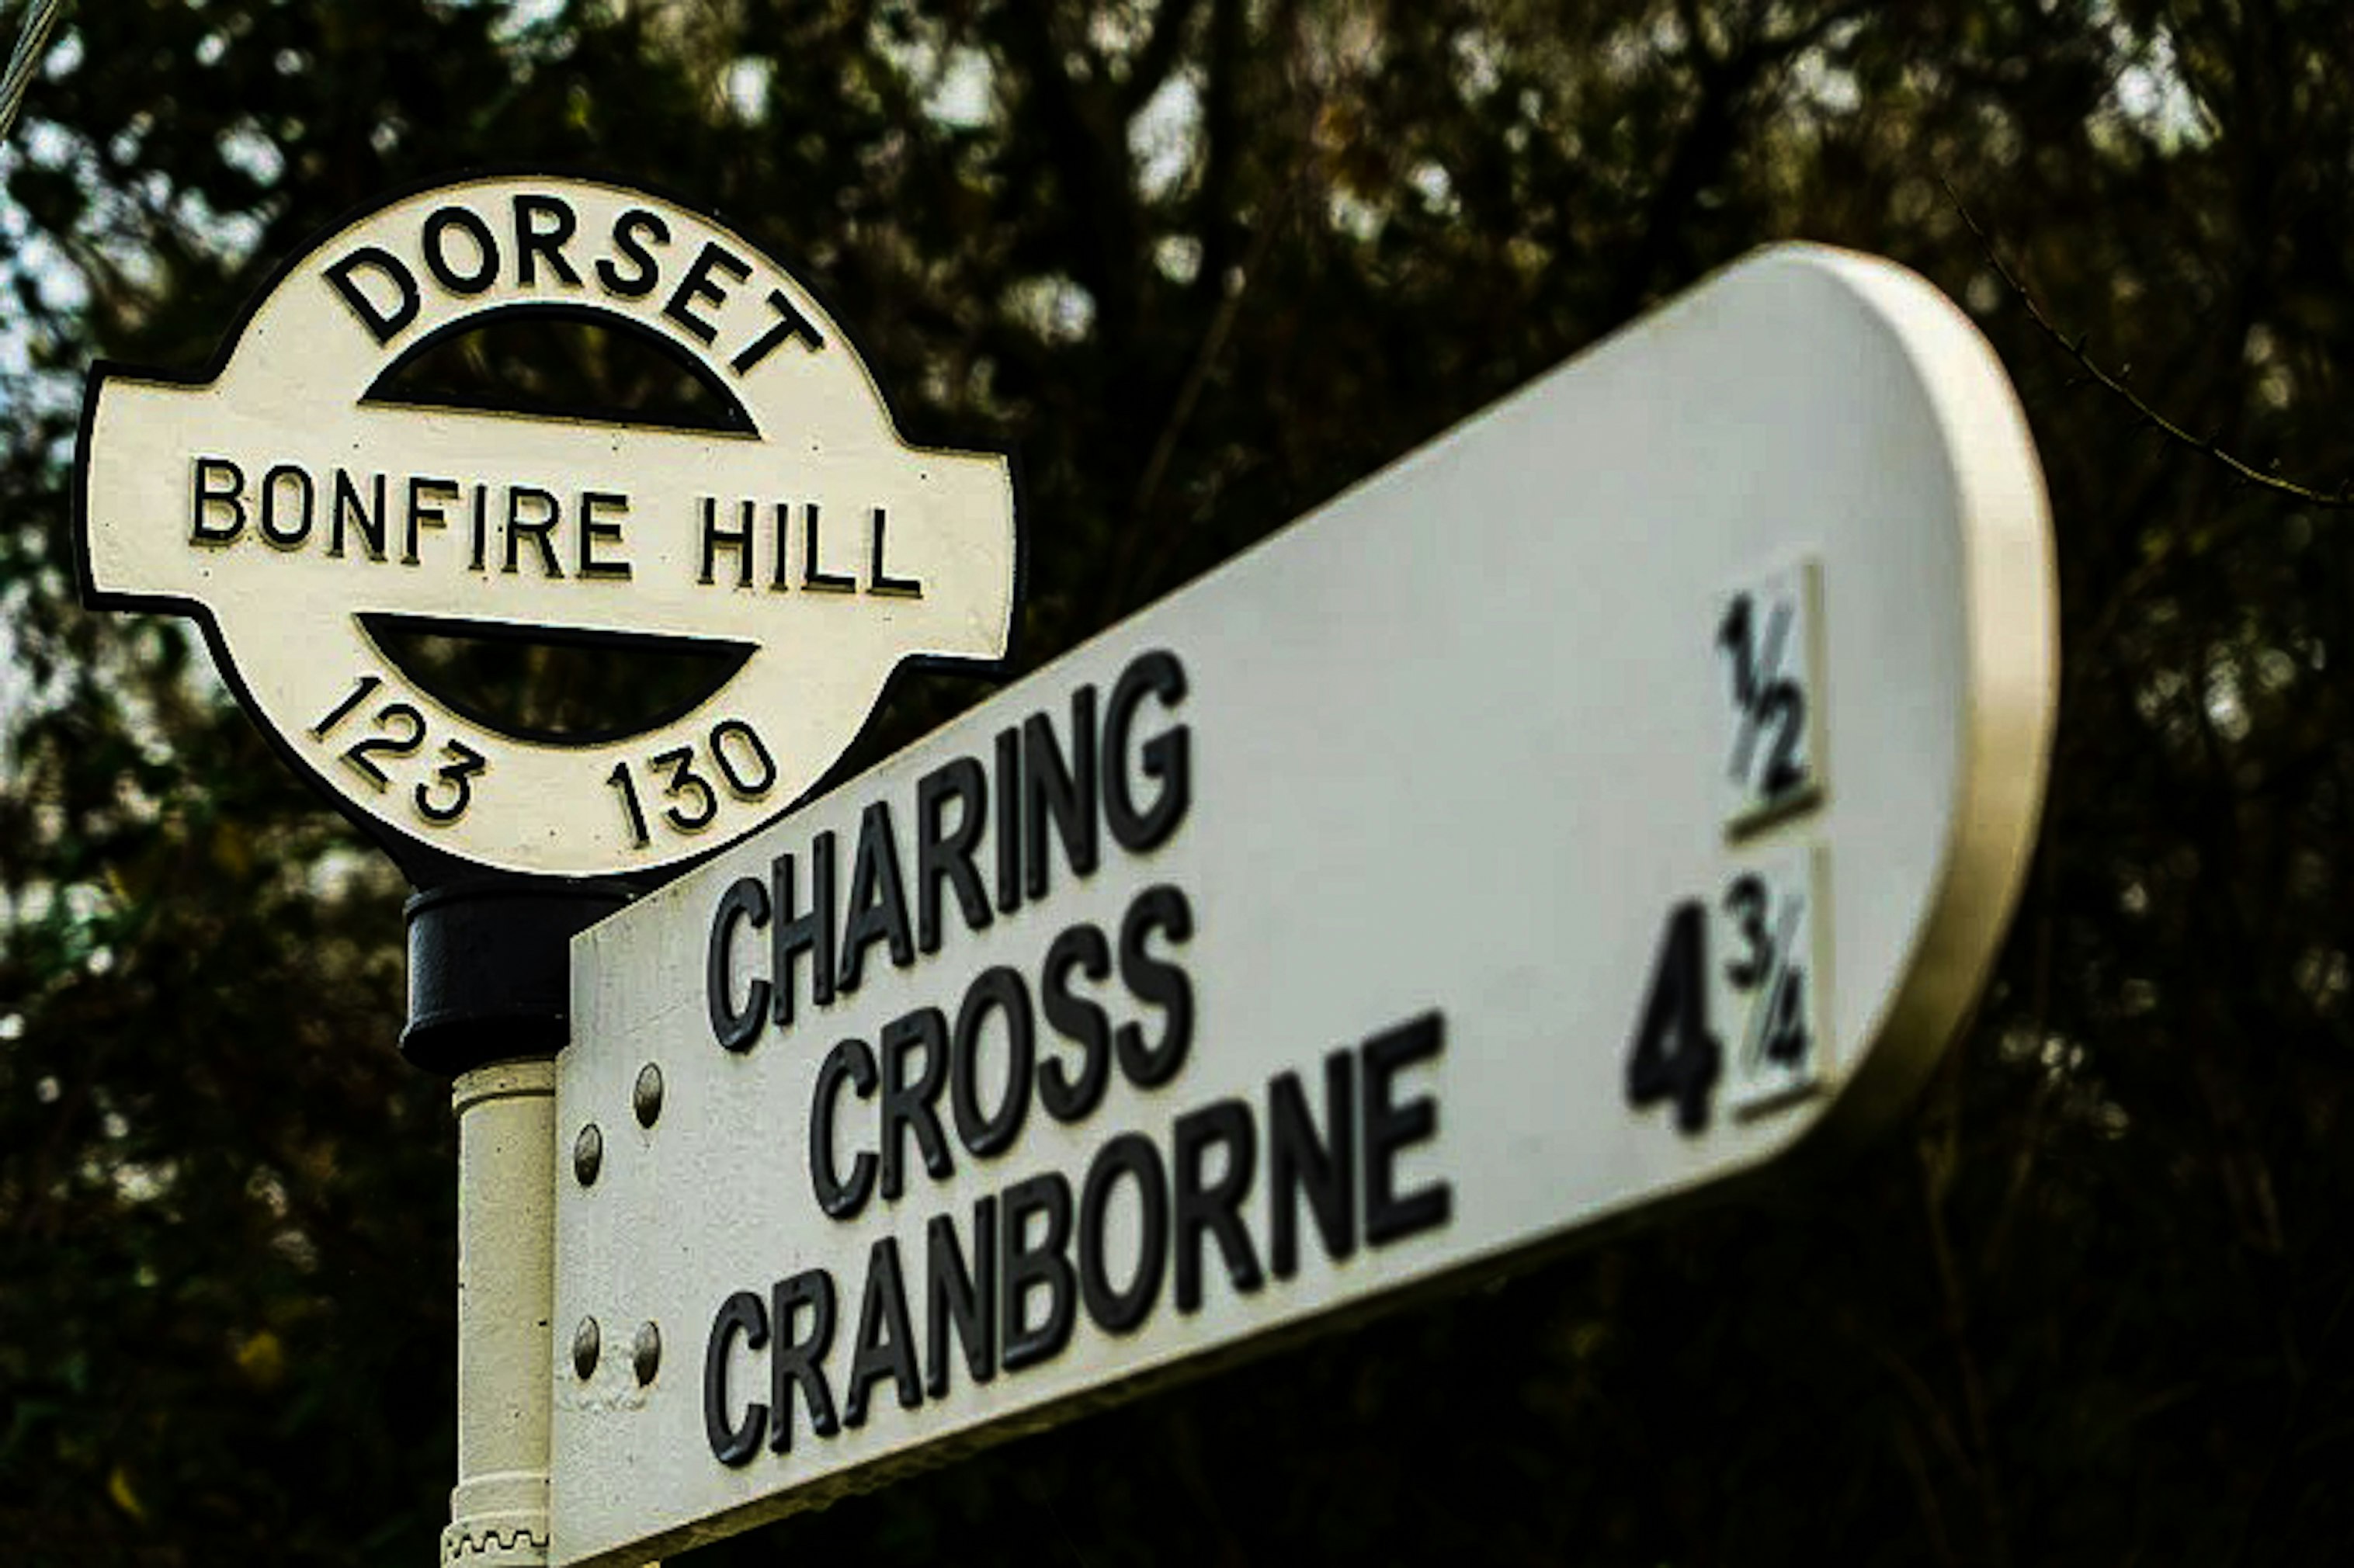 One of Dorset’s many fingerposts, with a radial of Bonfire Hill.